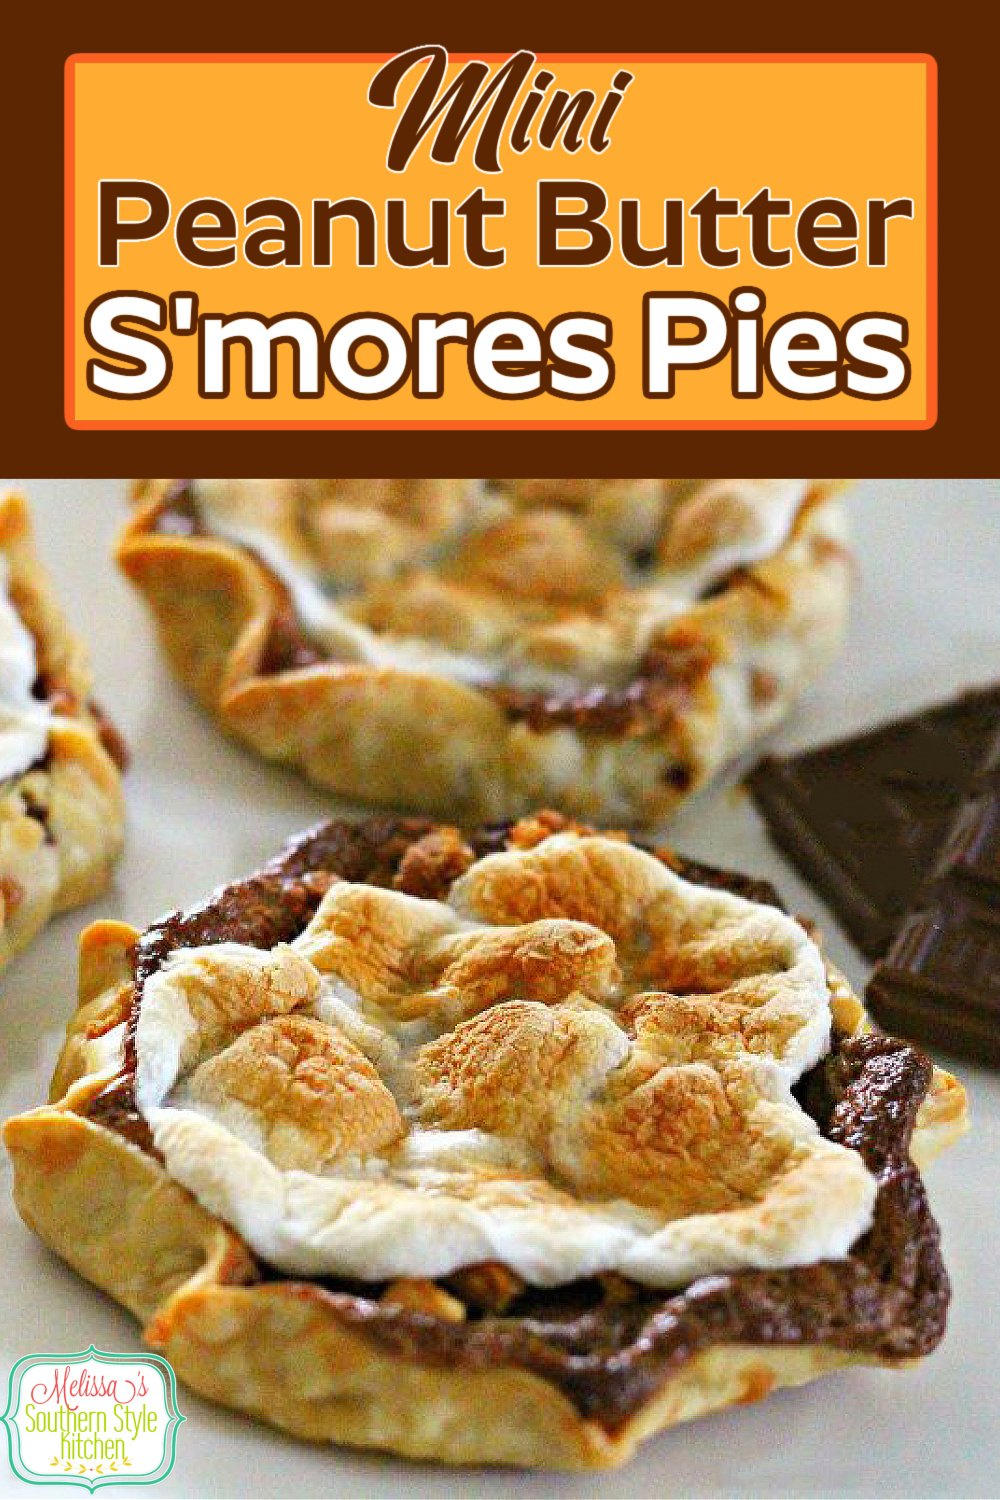 These ooey gooey single serving Mini Peanut Butter S'mores Pies are no campfire required s'mores made in the oven #smores #minismorespies #minipies #peanutbutterpies #desserts #dessertfoodrecipes #southernrecipes via @melissasssk